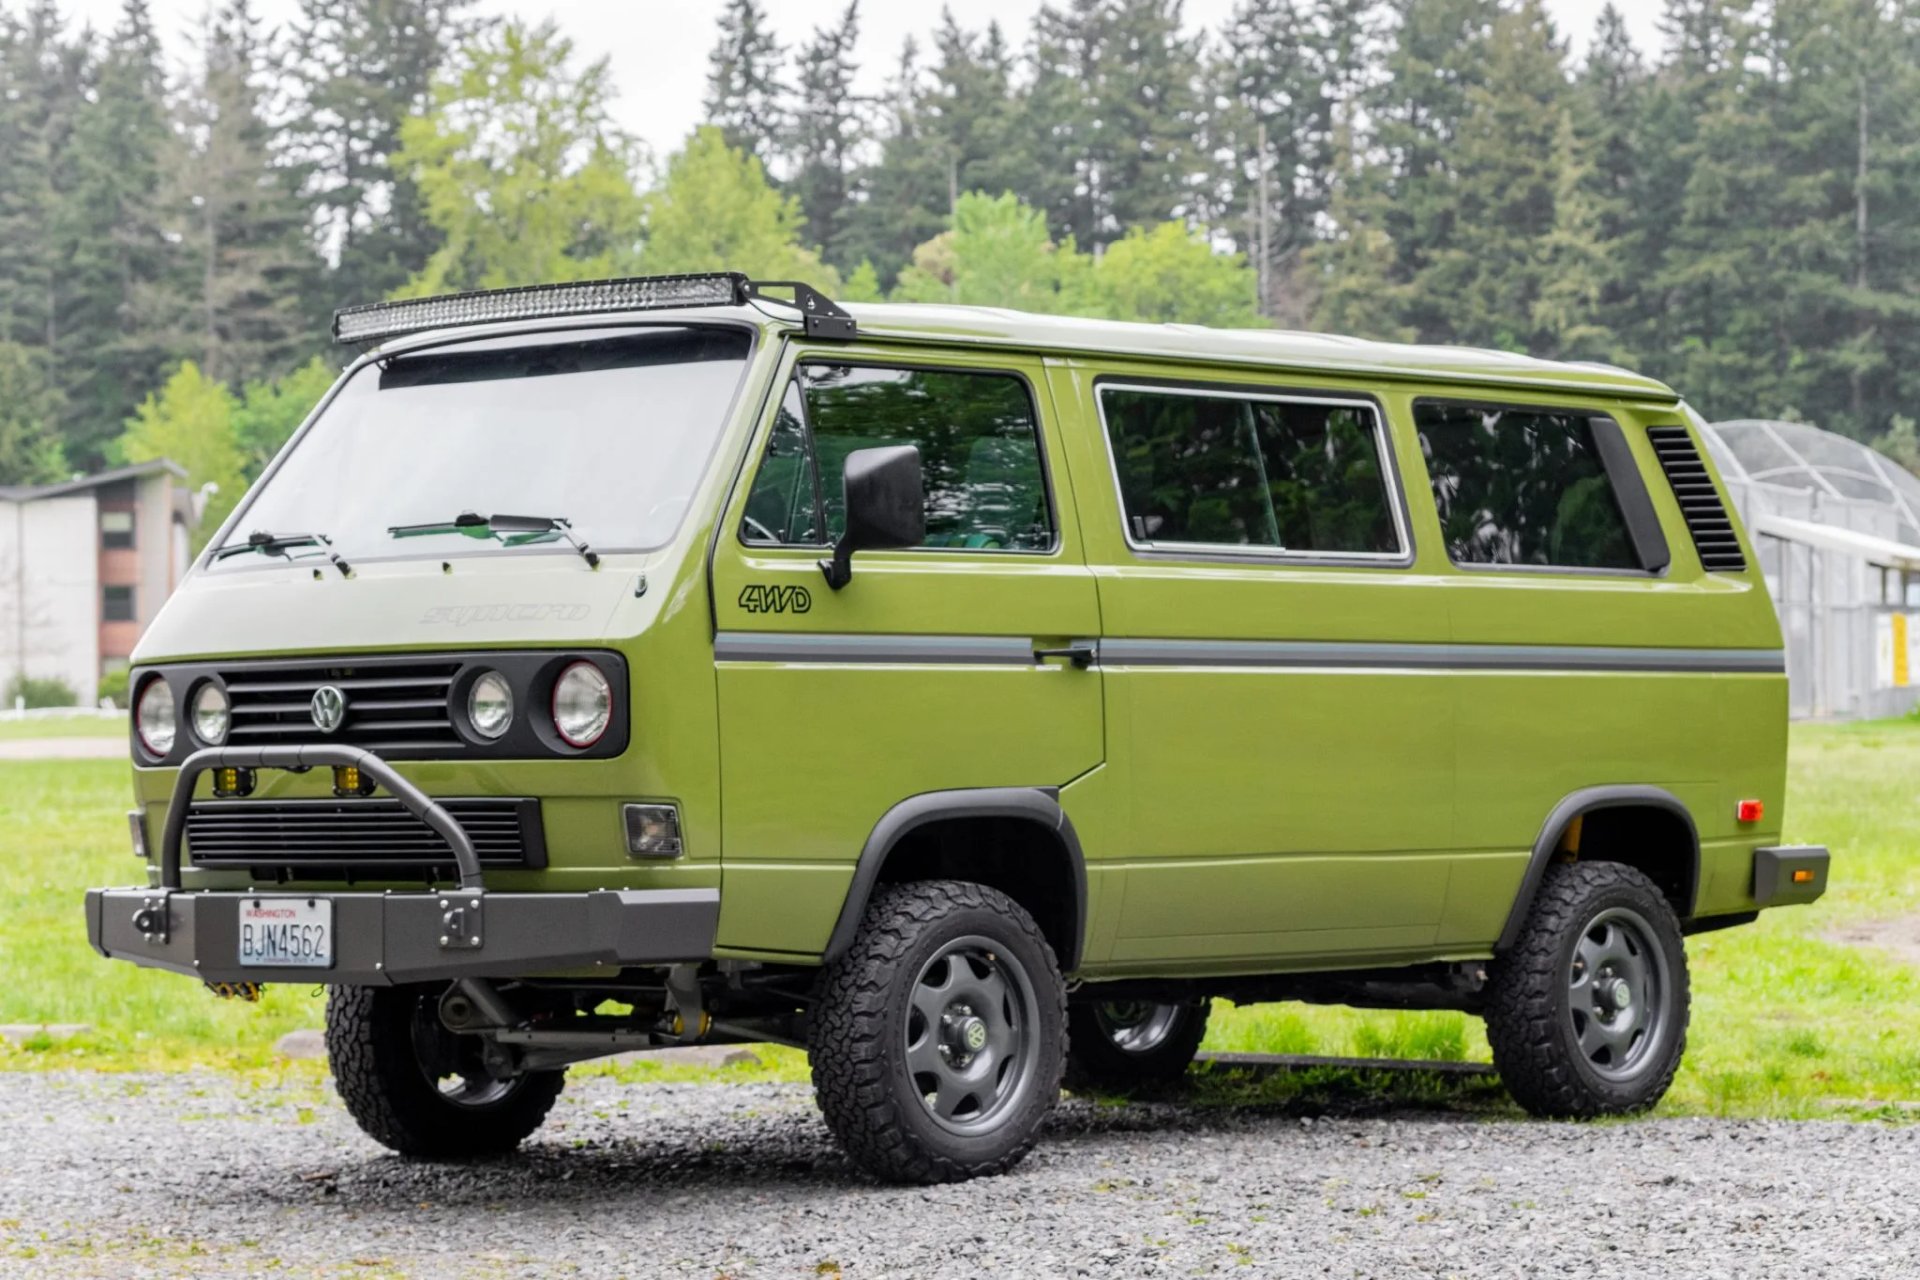 SubaruPowered Volkswagen Vanagon Has the Syncro Charm, Would Make a